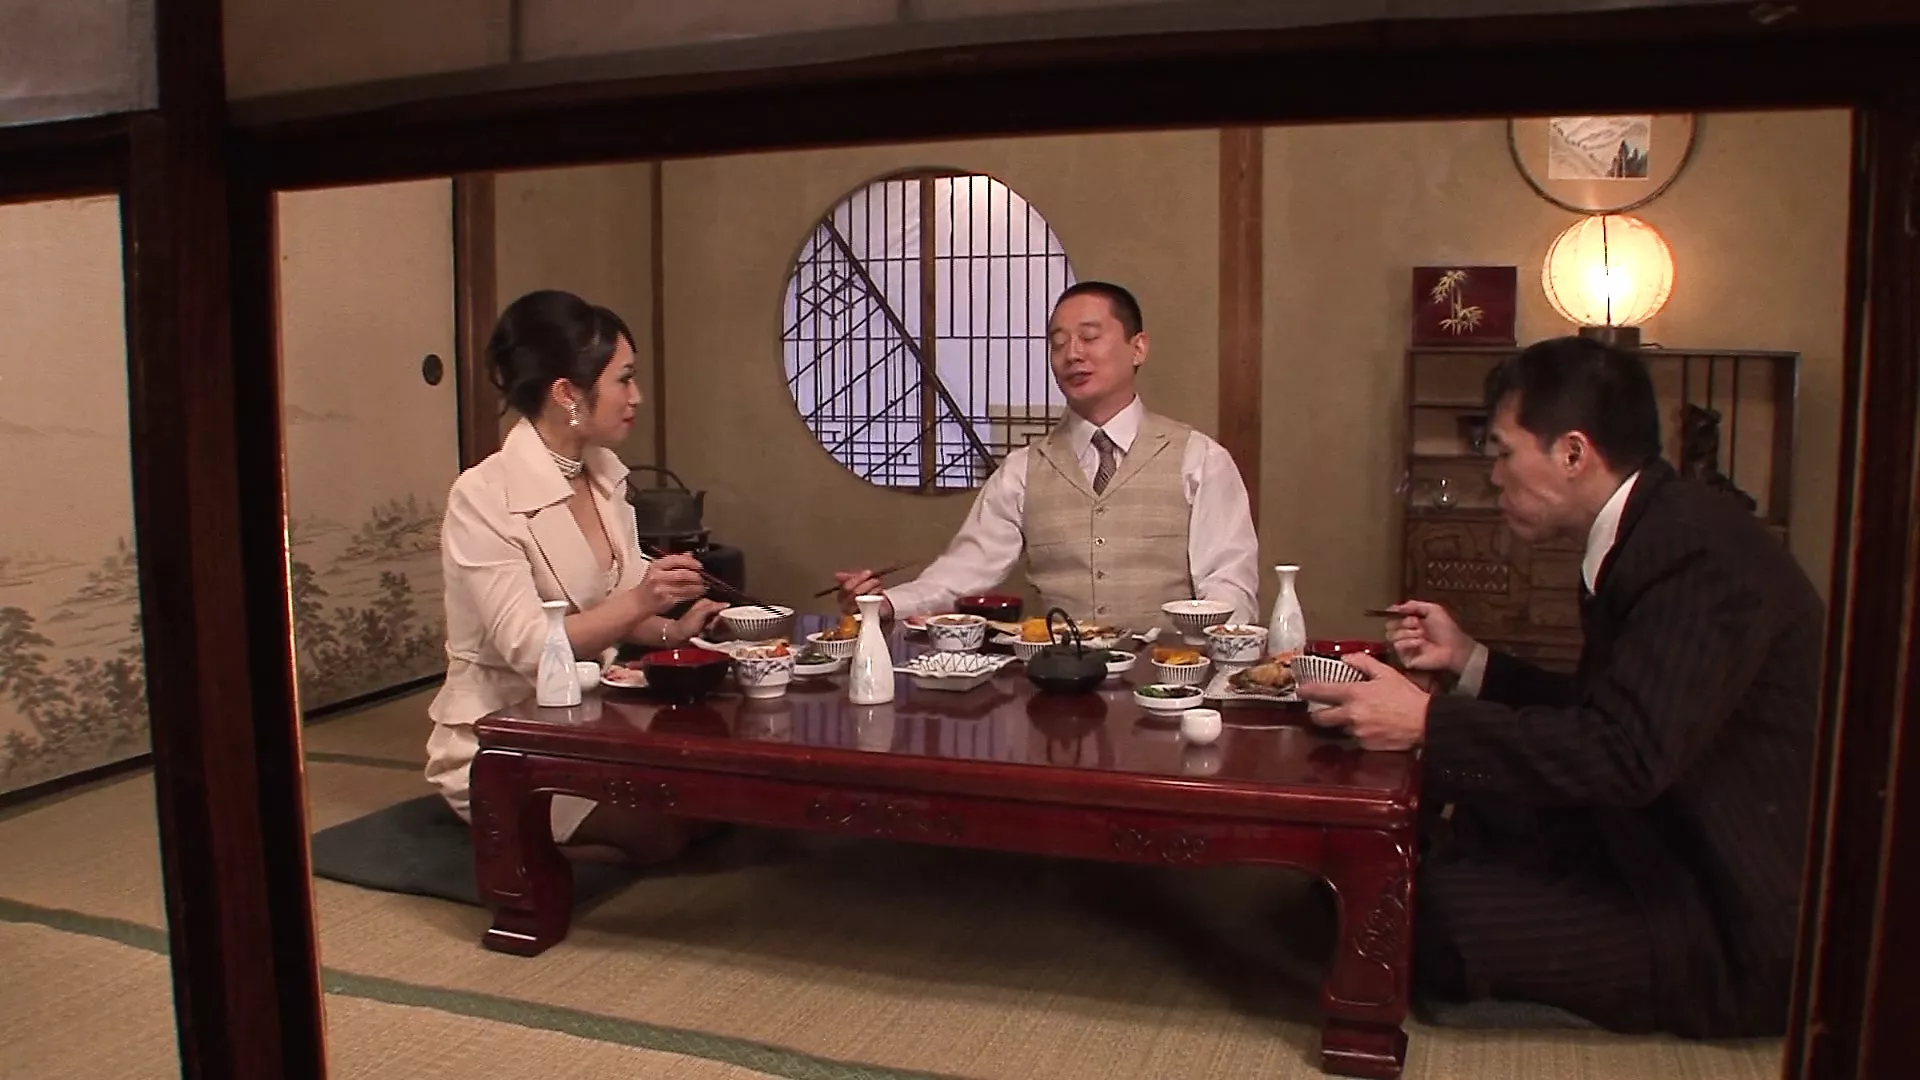 Family dinner escalated! Japanese forget their manners and bang in a threesome! photo